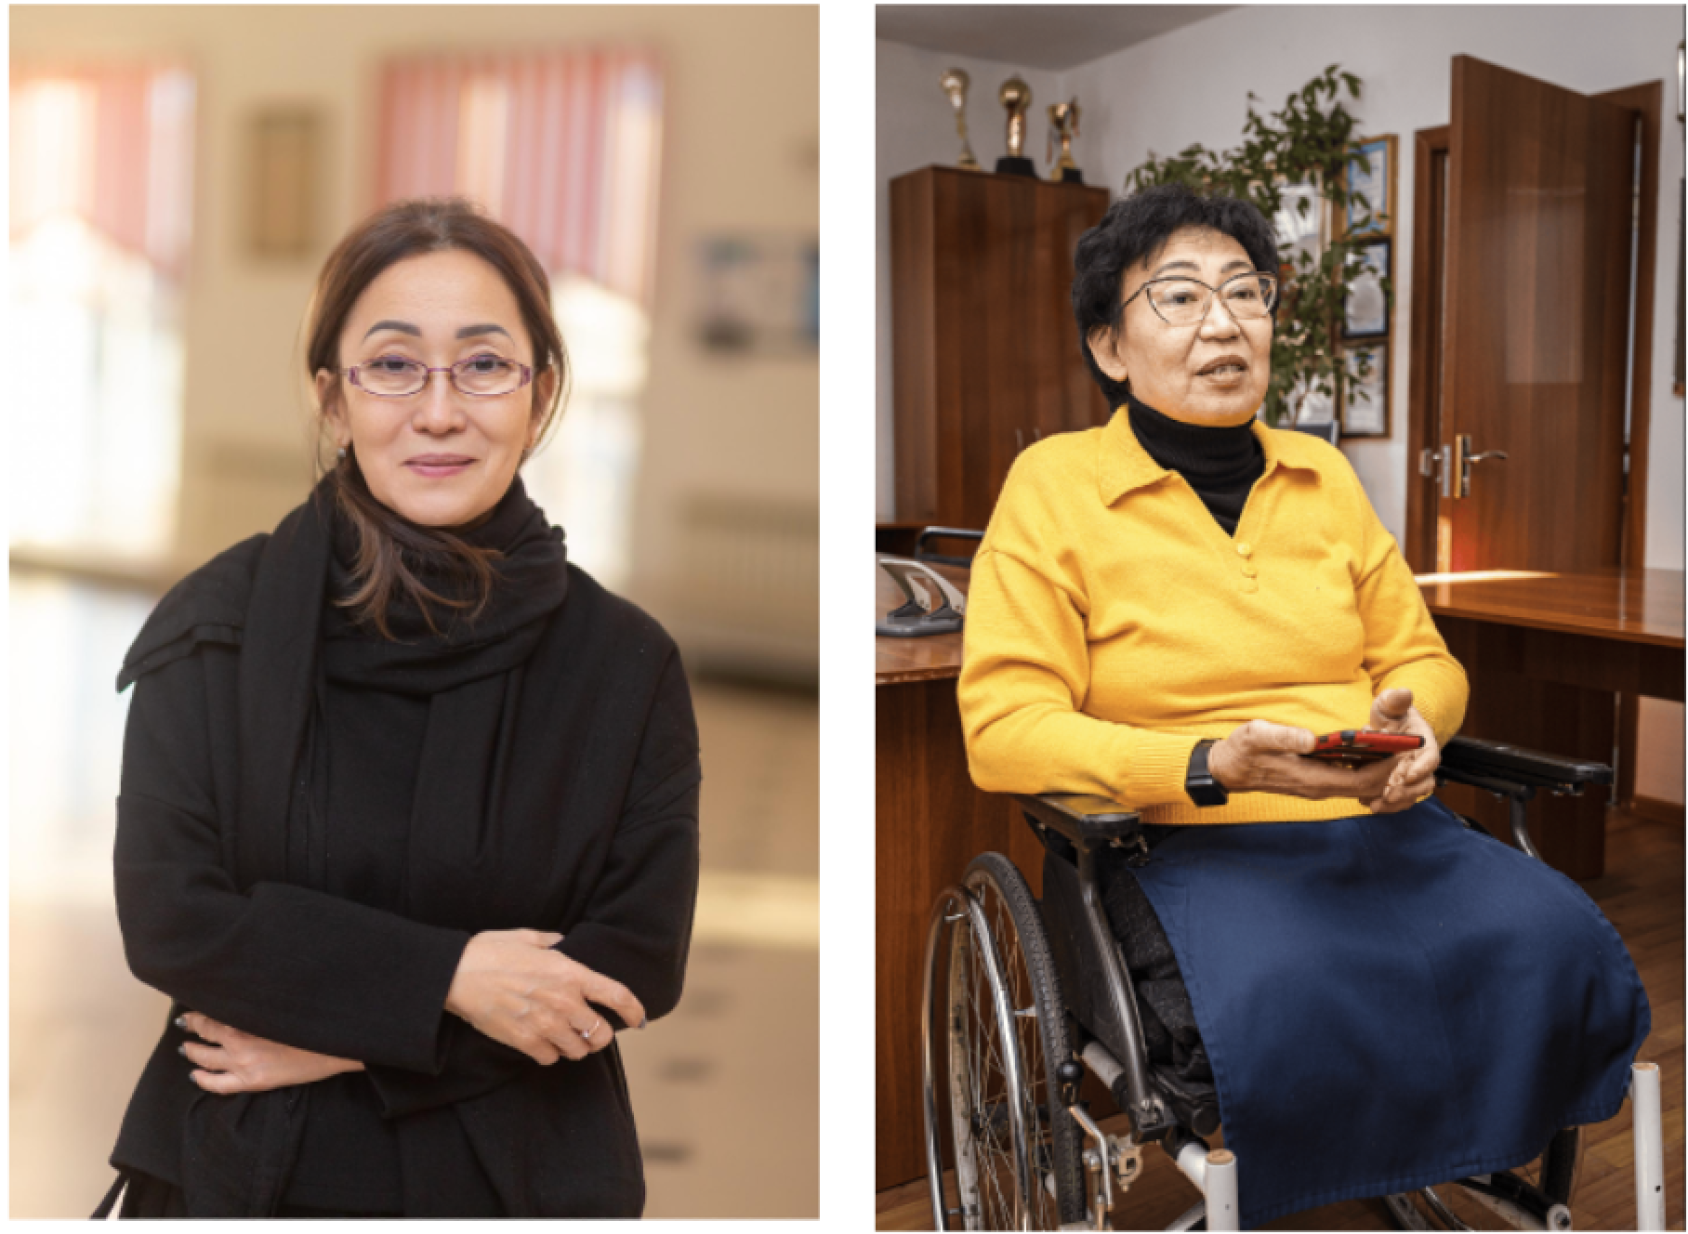 Two women side by side, one in a black shirt and another in a yellow jacket on a wheelchair